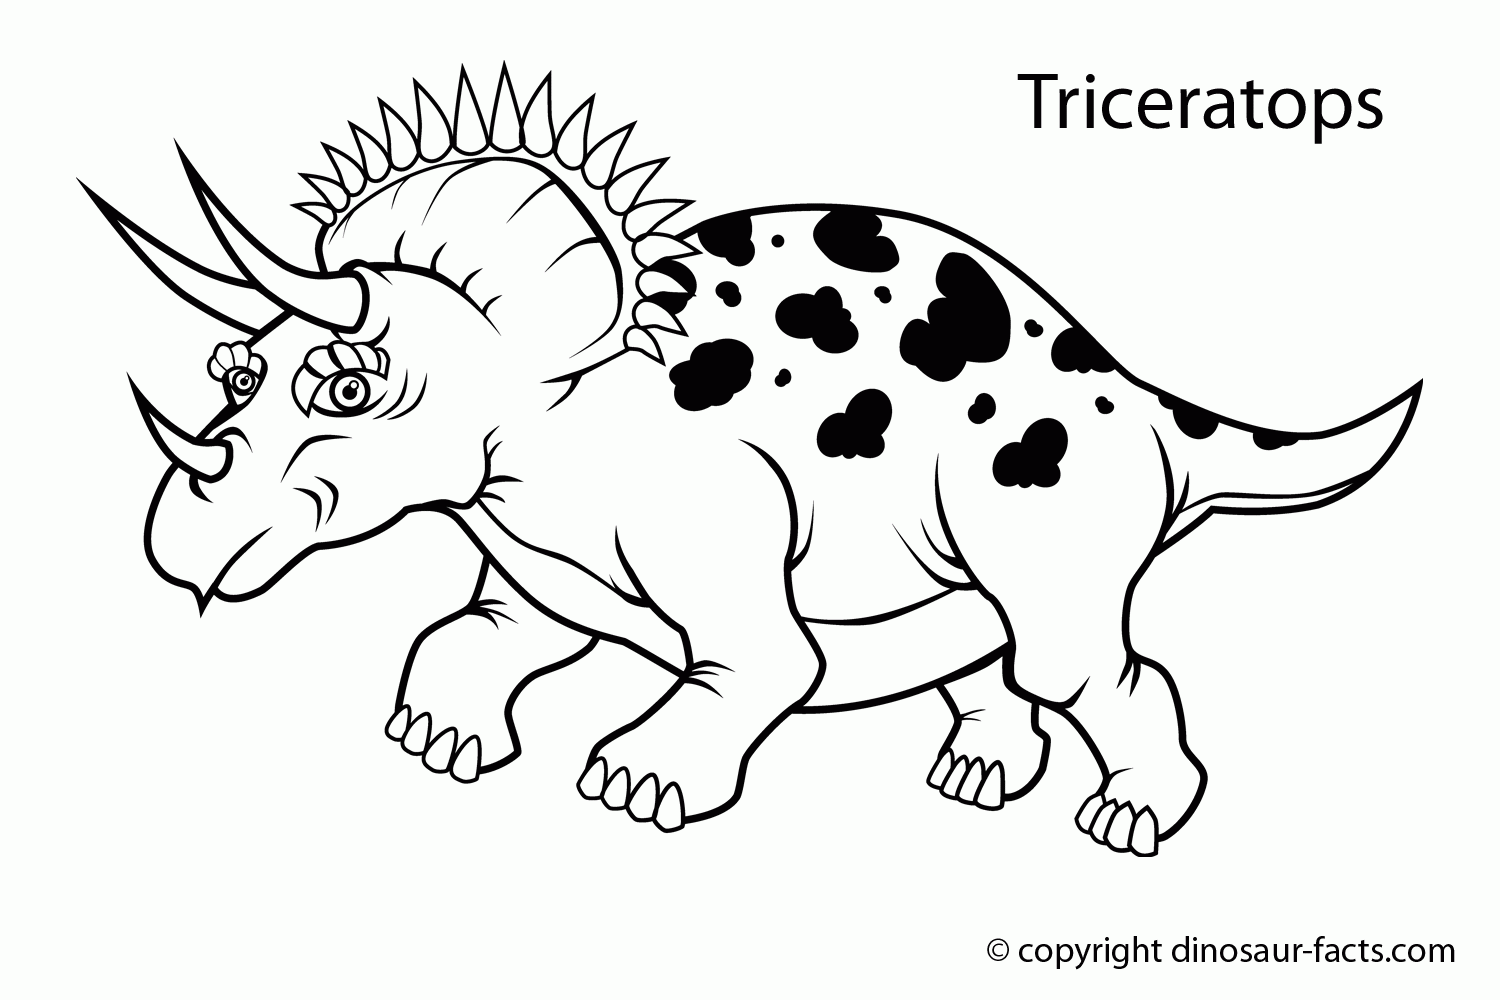 Dinosaurs For Kids - Coloring Pages for Kids and for Adults